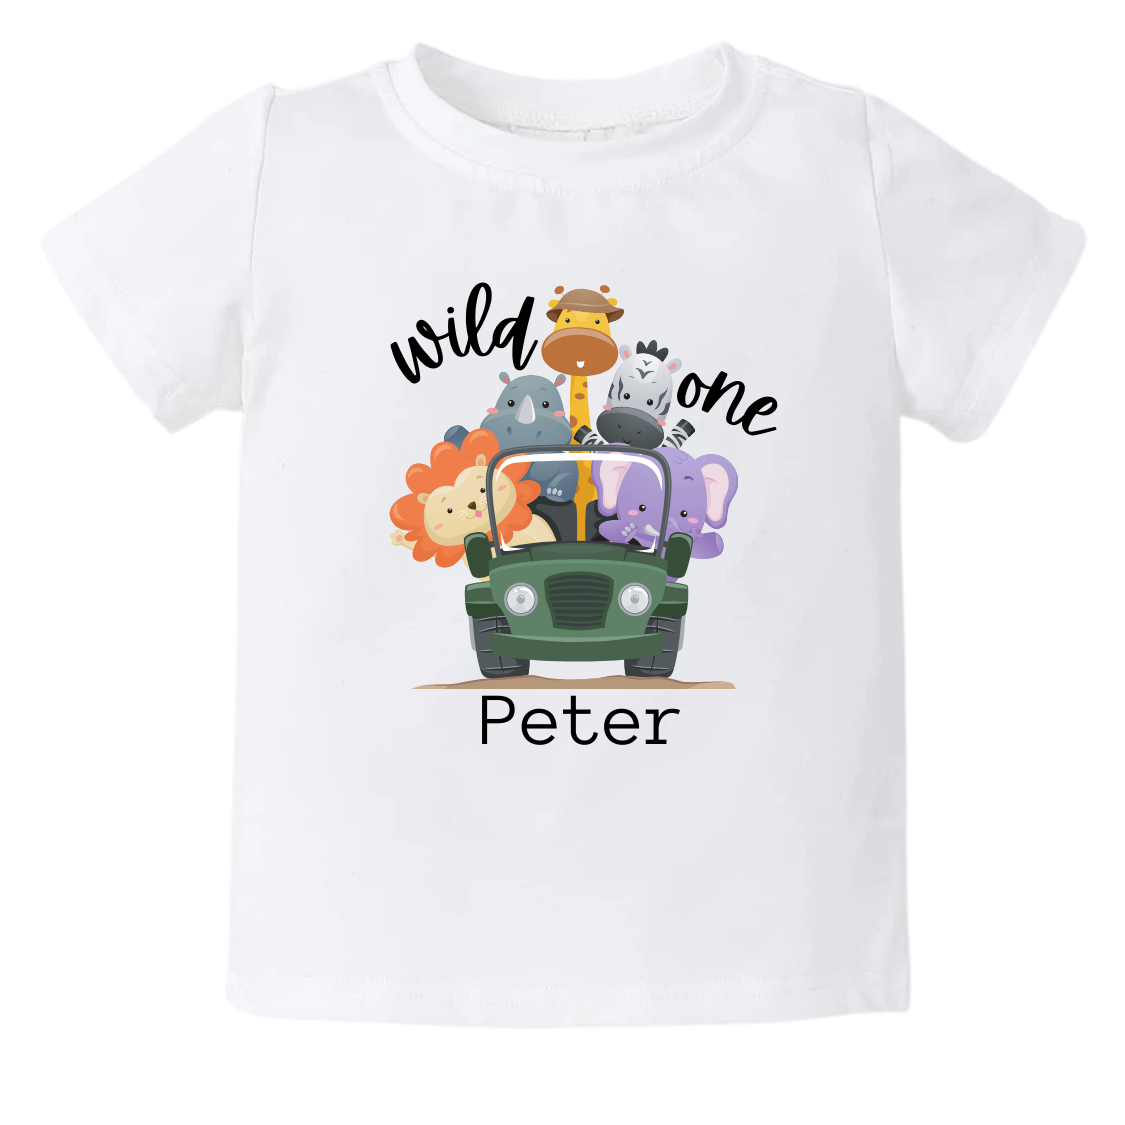 Kid's t-shirt and baby onesie with cute car and animals design, perfect for little adventurers.